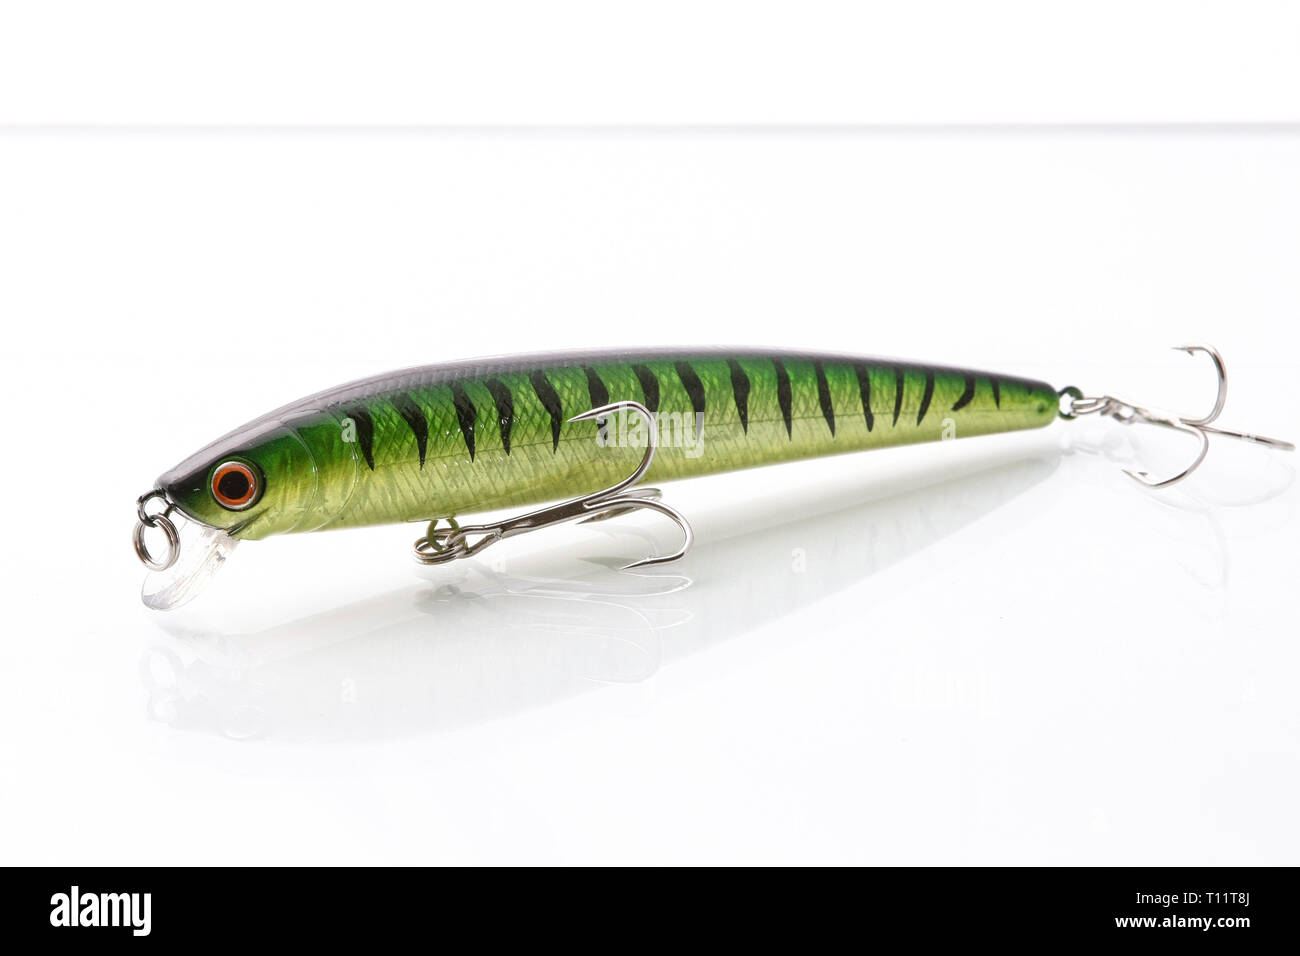 Lure Wobbler Popper on Wood Background with an two hooks. Relax at